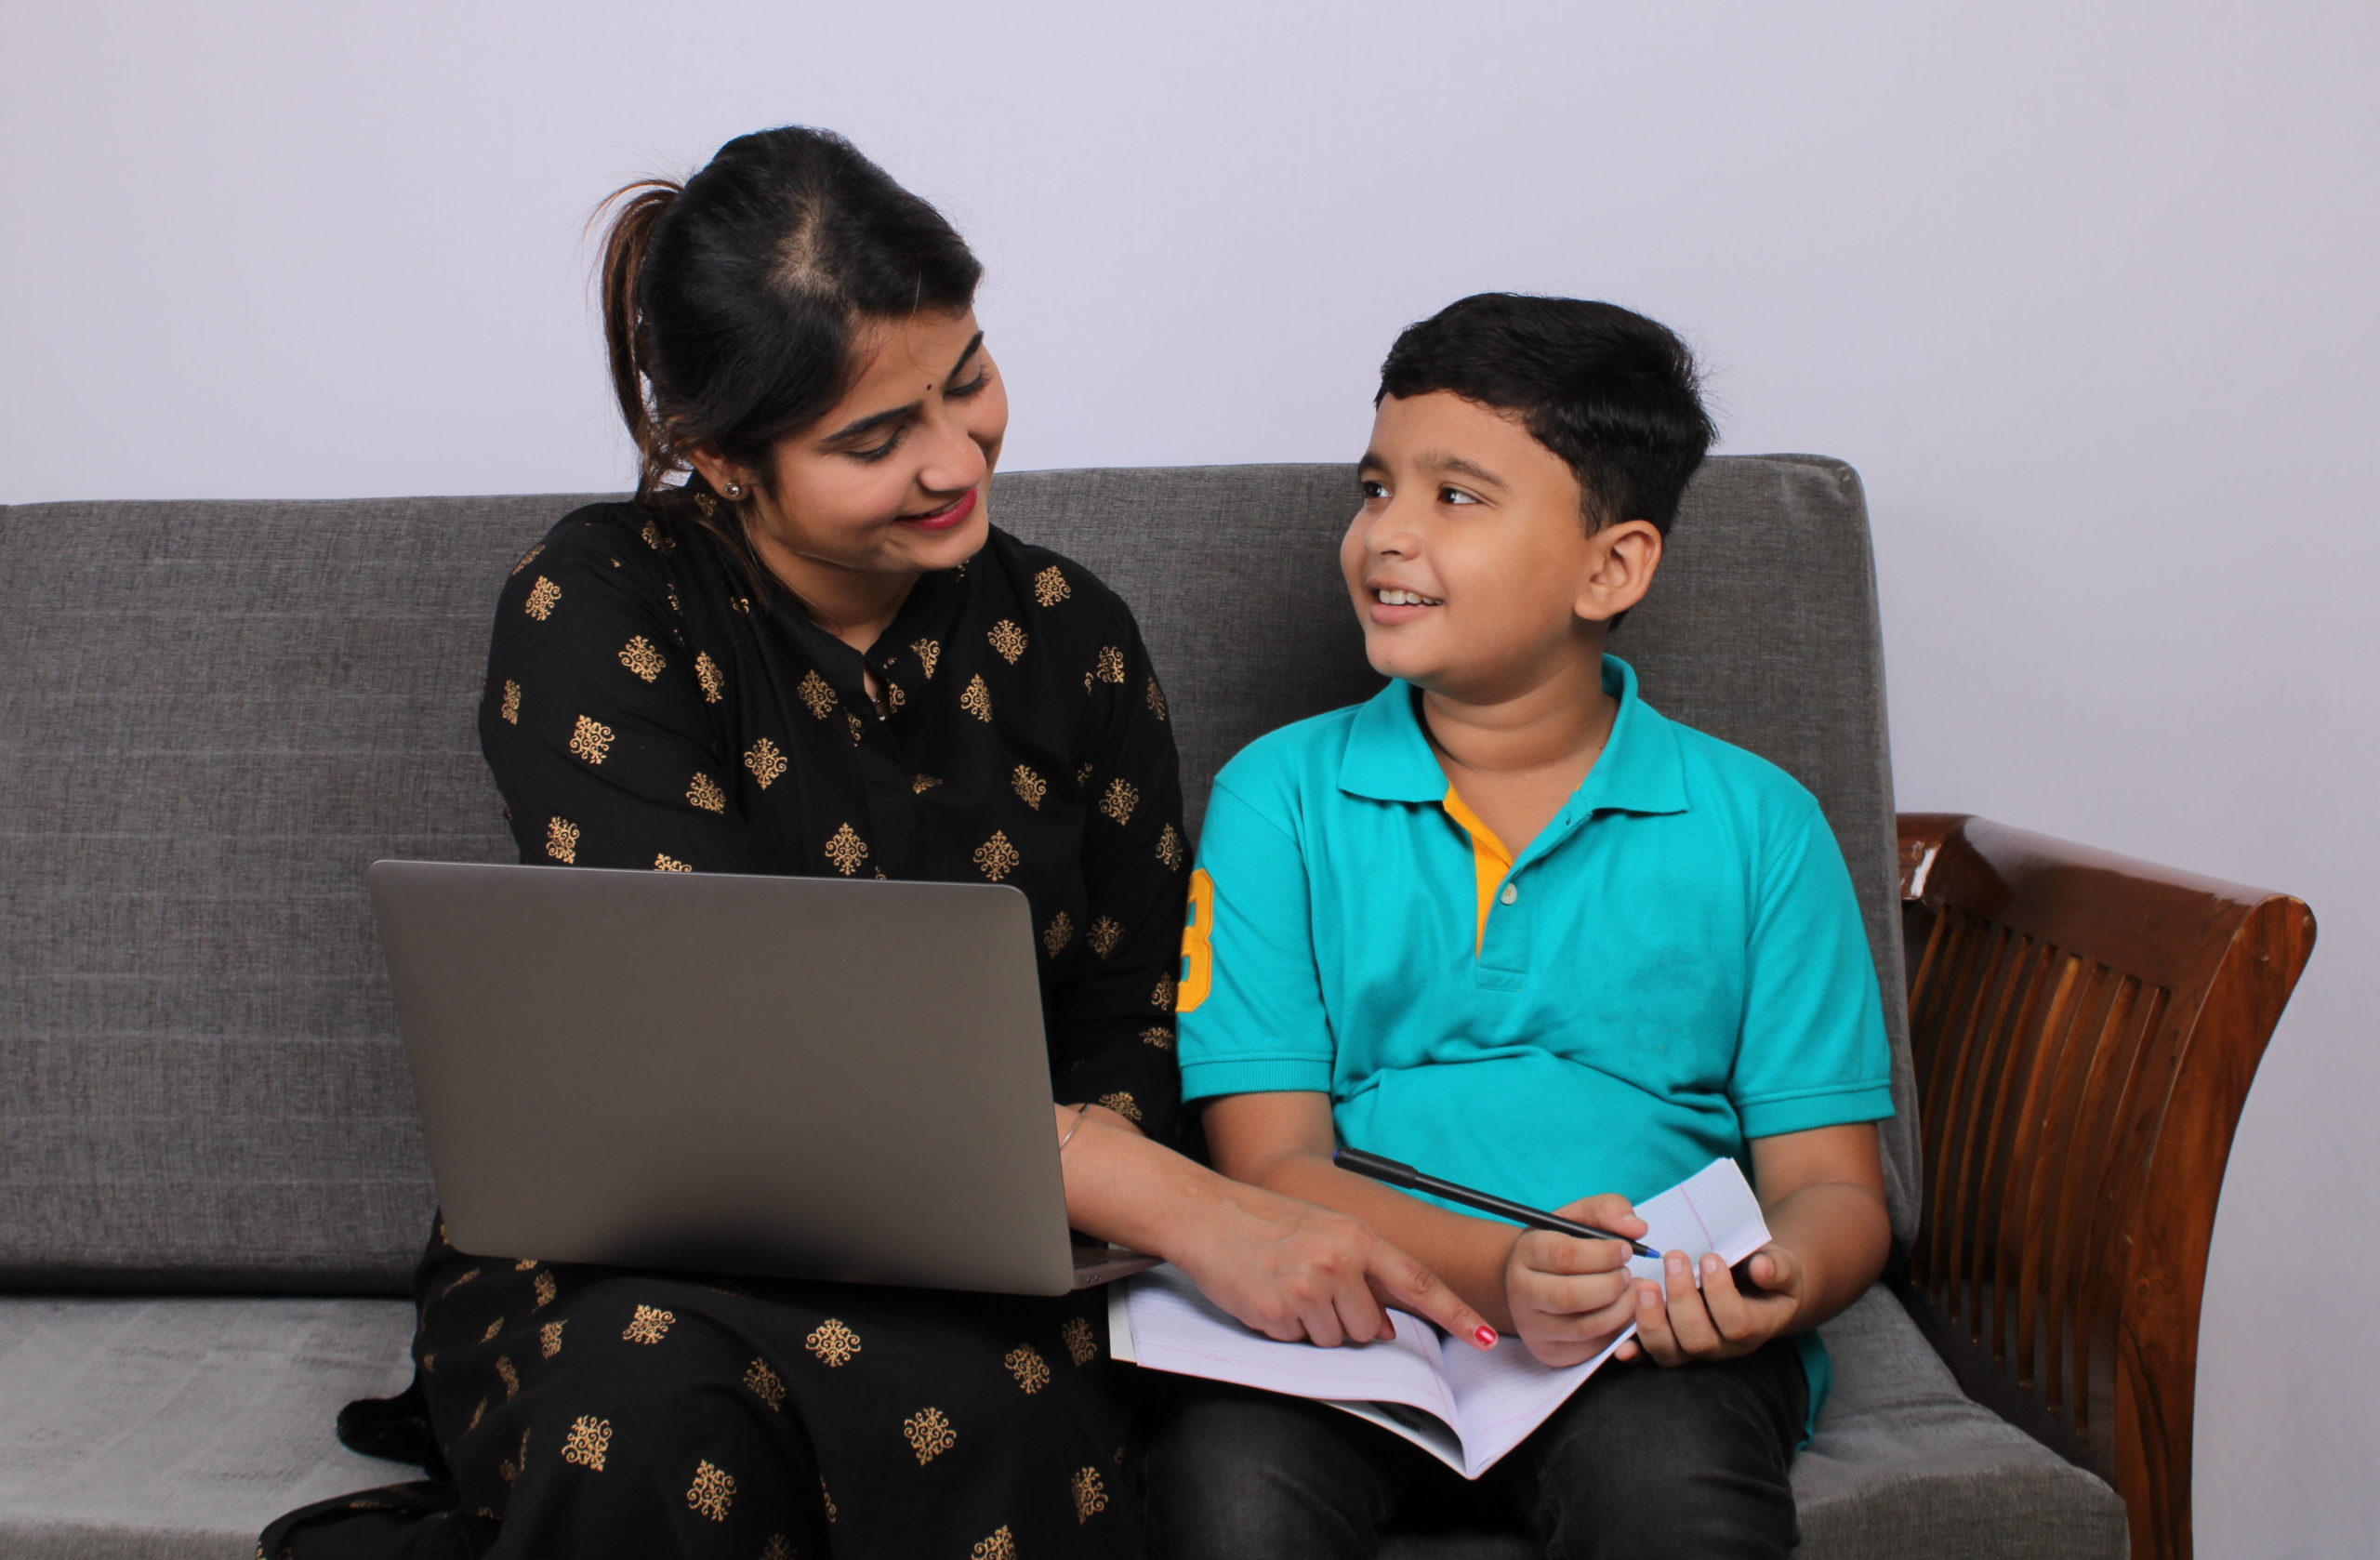 Coronavirus Outbreak and education concept - Lockdown and school closures. Indian Mother helping son studying online classes at home. COVID-19